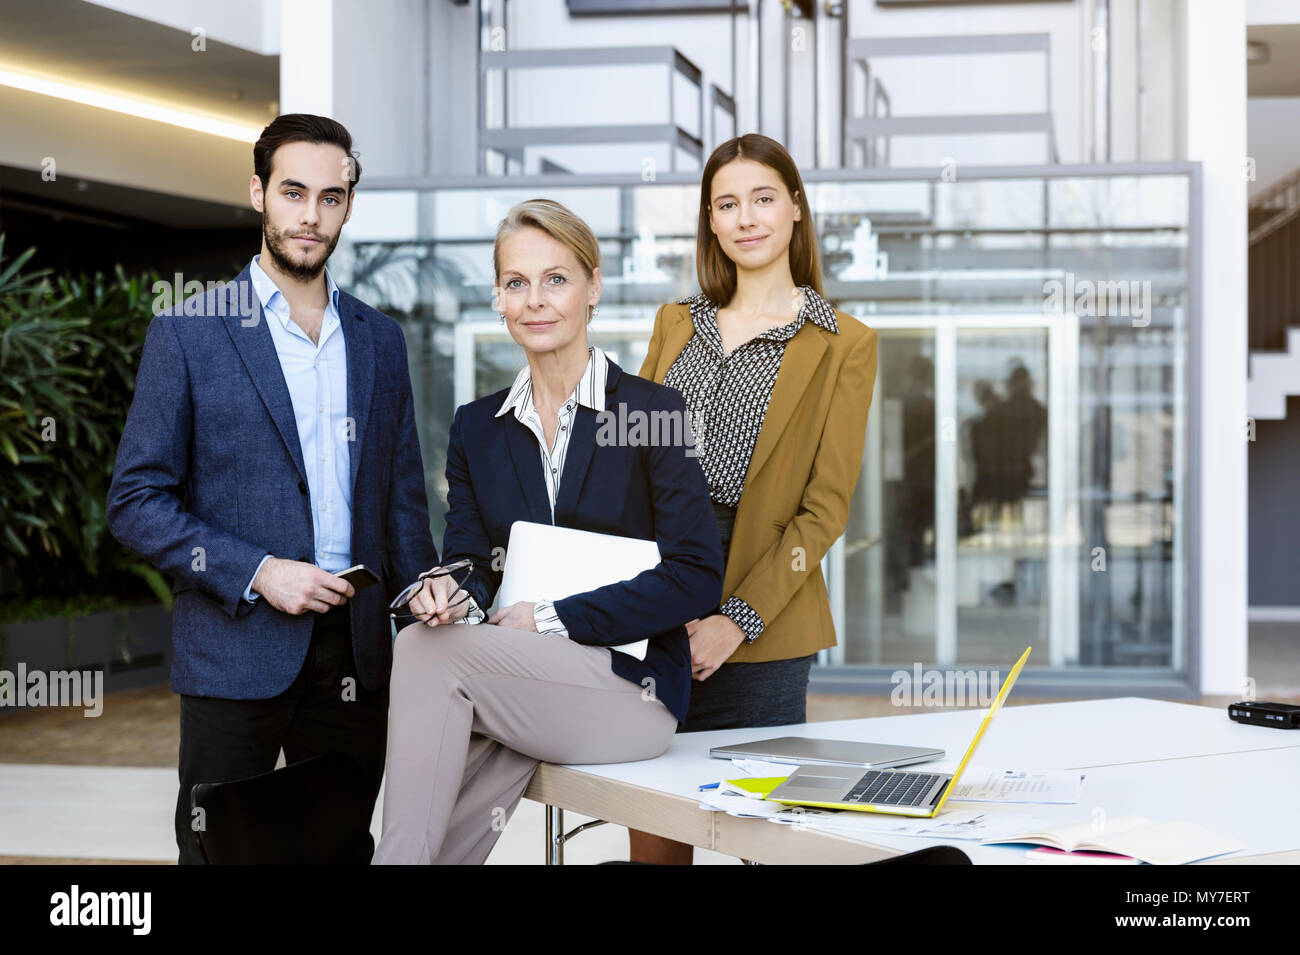 Portrait of business people looking at camera Stock Photo